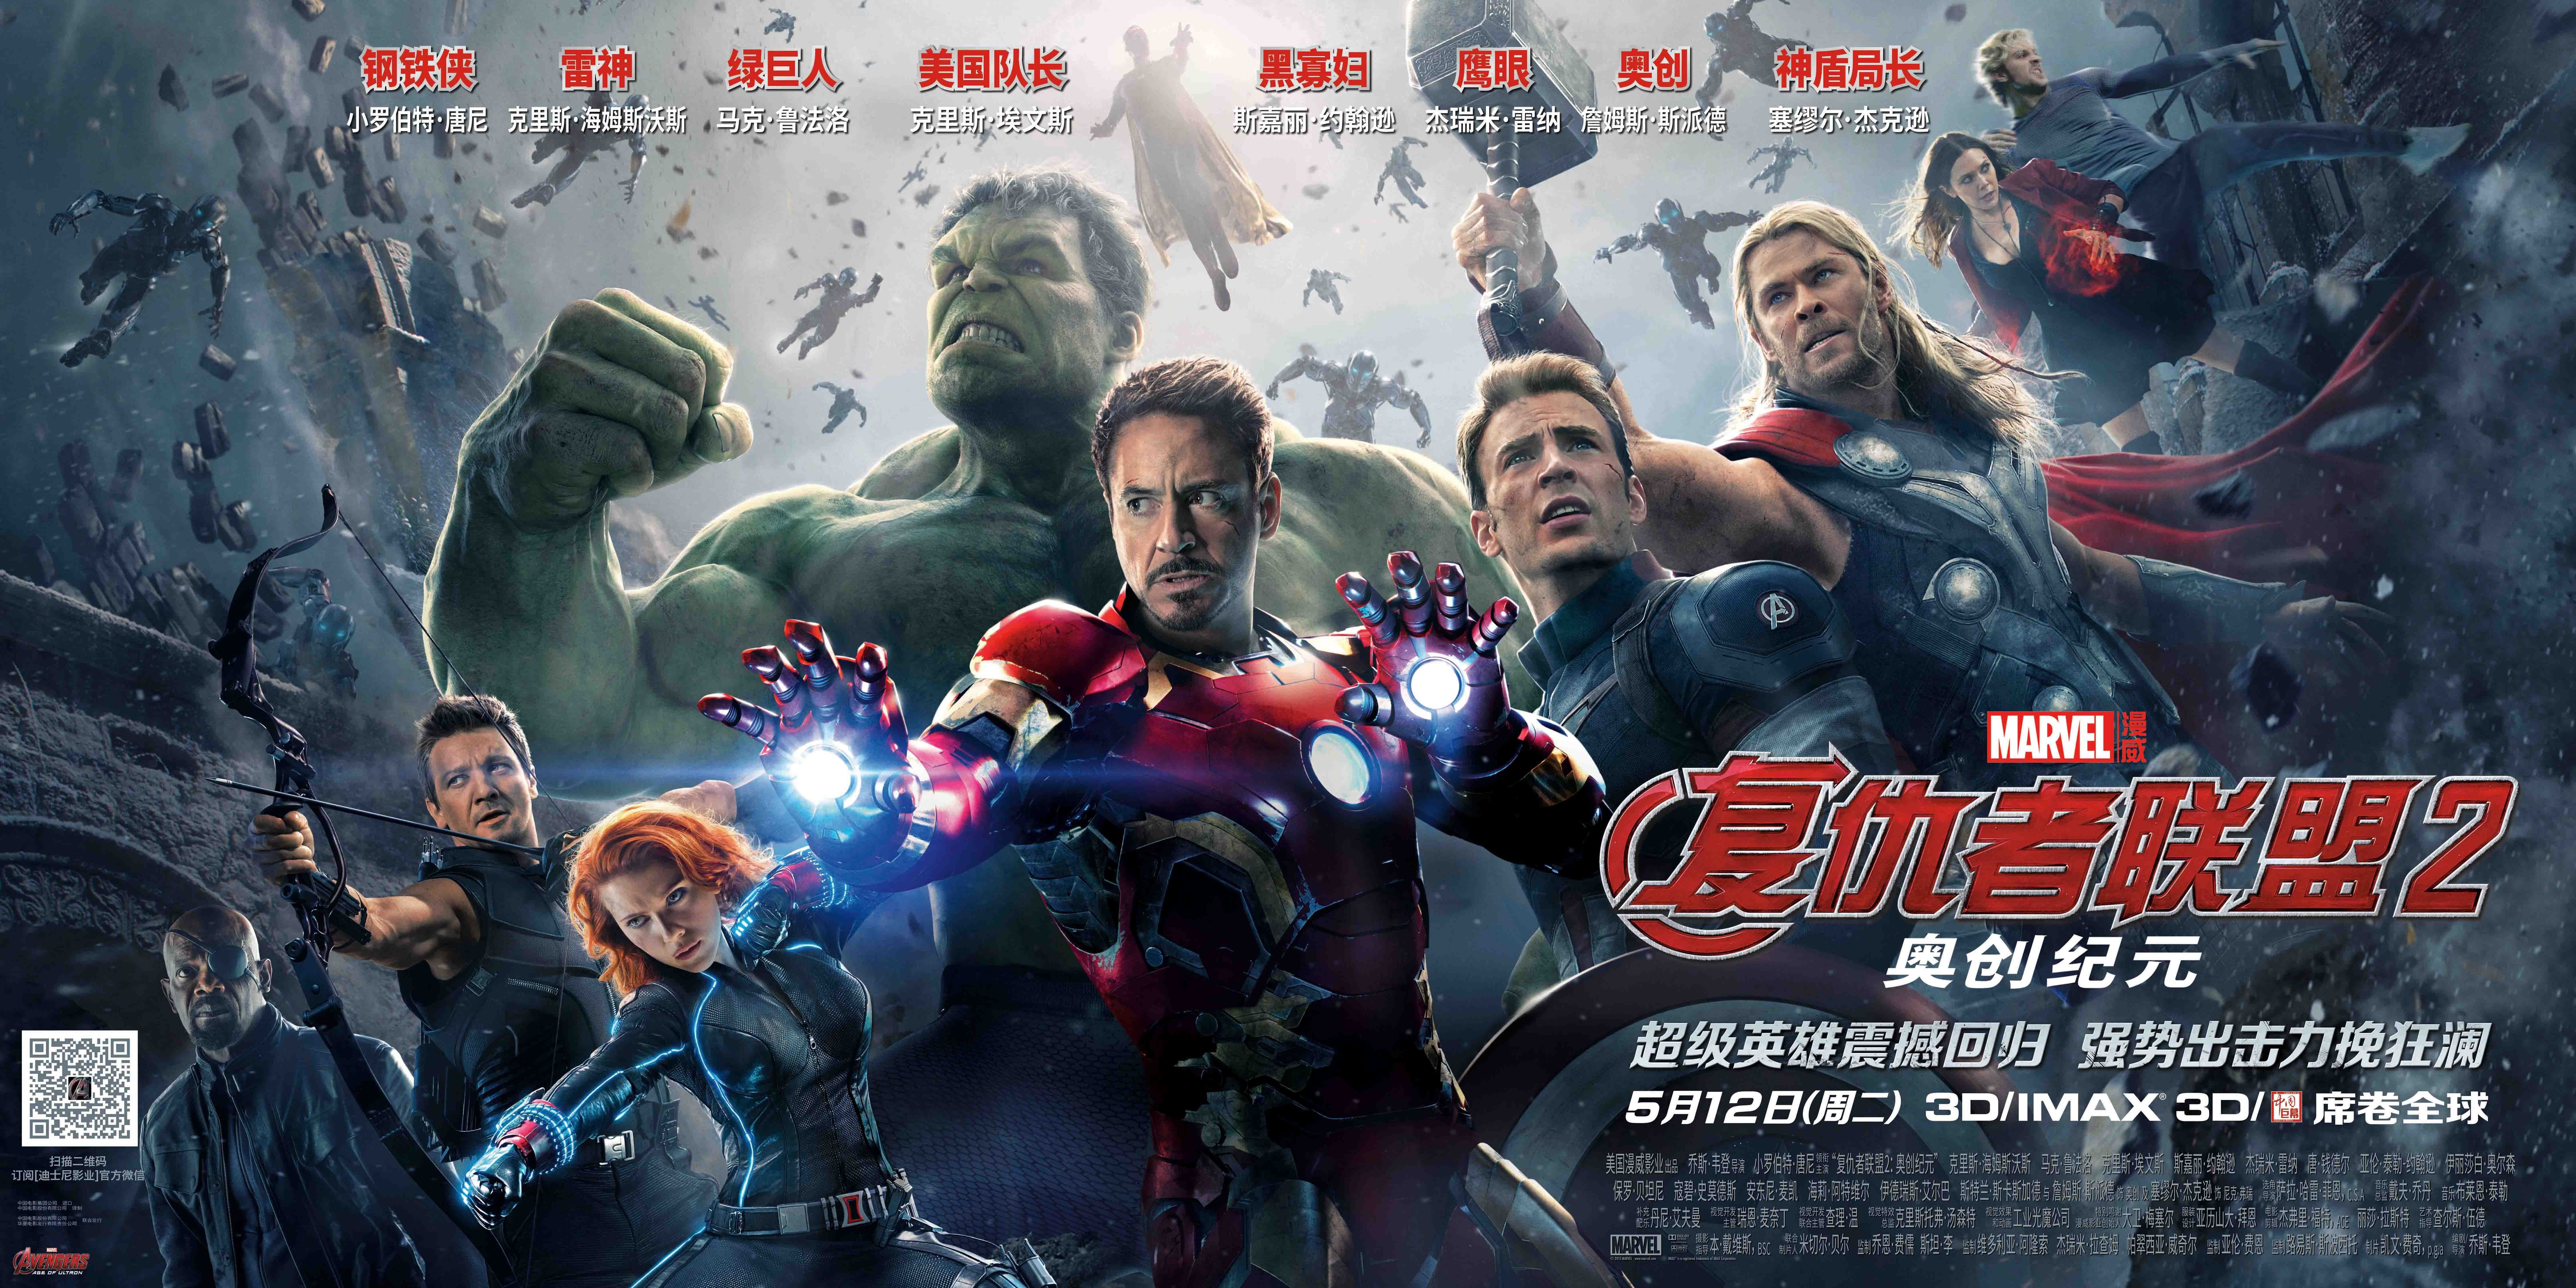 Avengers Age Of Ultron Poster Hd - 9000x4500 Wallpaper 